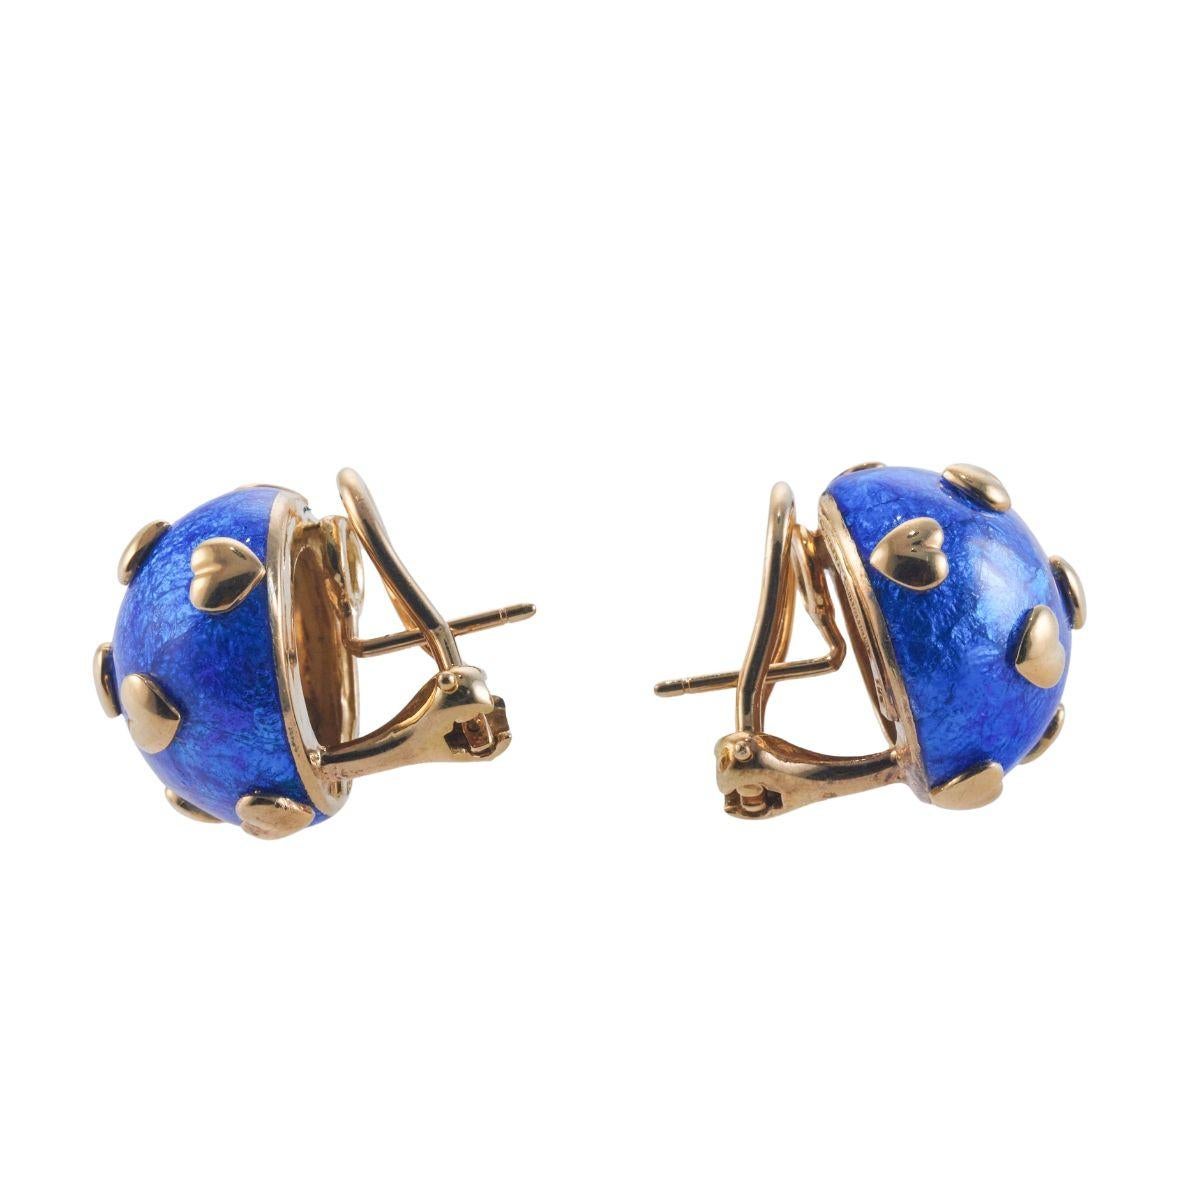 Pair of 18k gold round earrings by Jean Schlumberger for Tiffany & Co, ornate with heart motifs on blue enamel. Earrings measure 16mm in diameter. Marked: Tiffany & Co, Schlumberger, 750. Weight is 19.3 grams. 